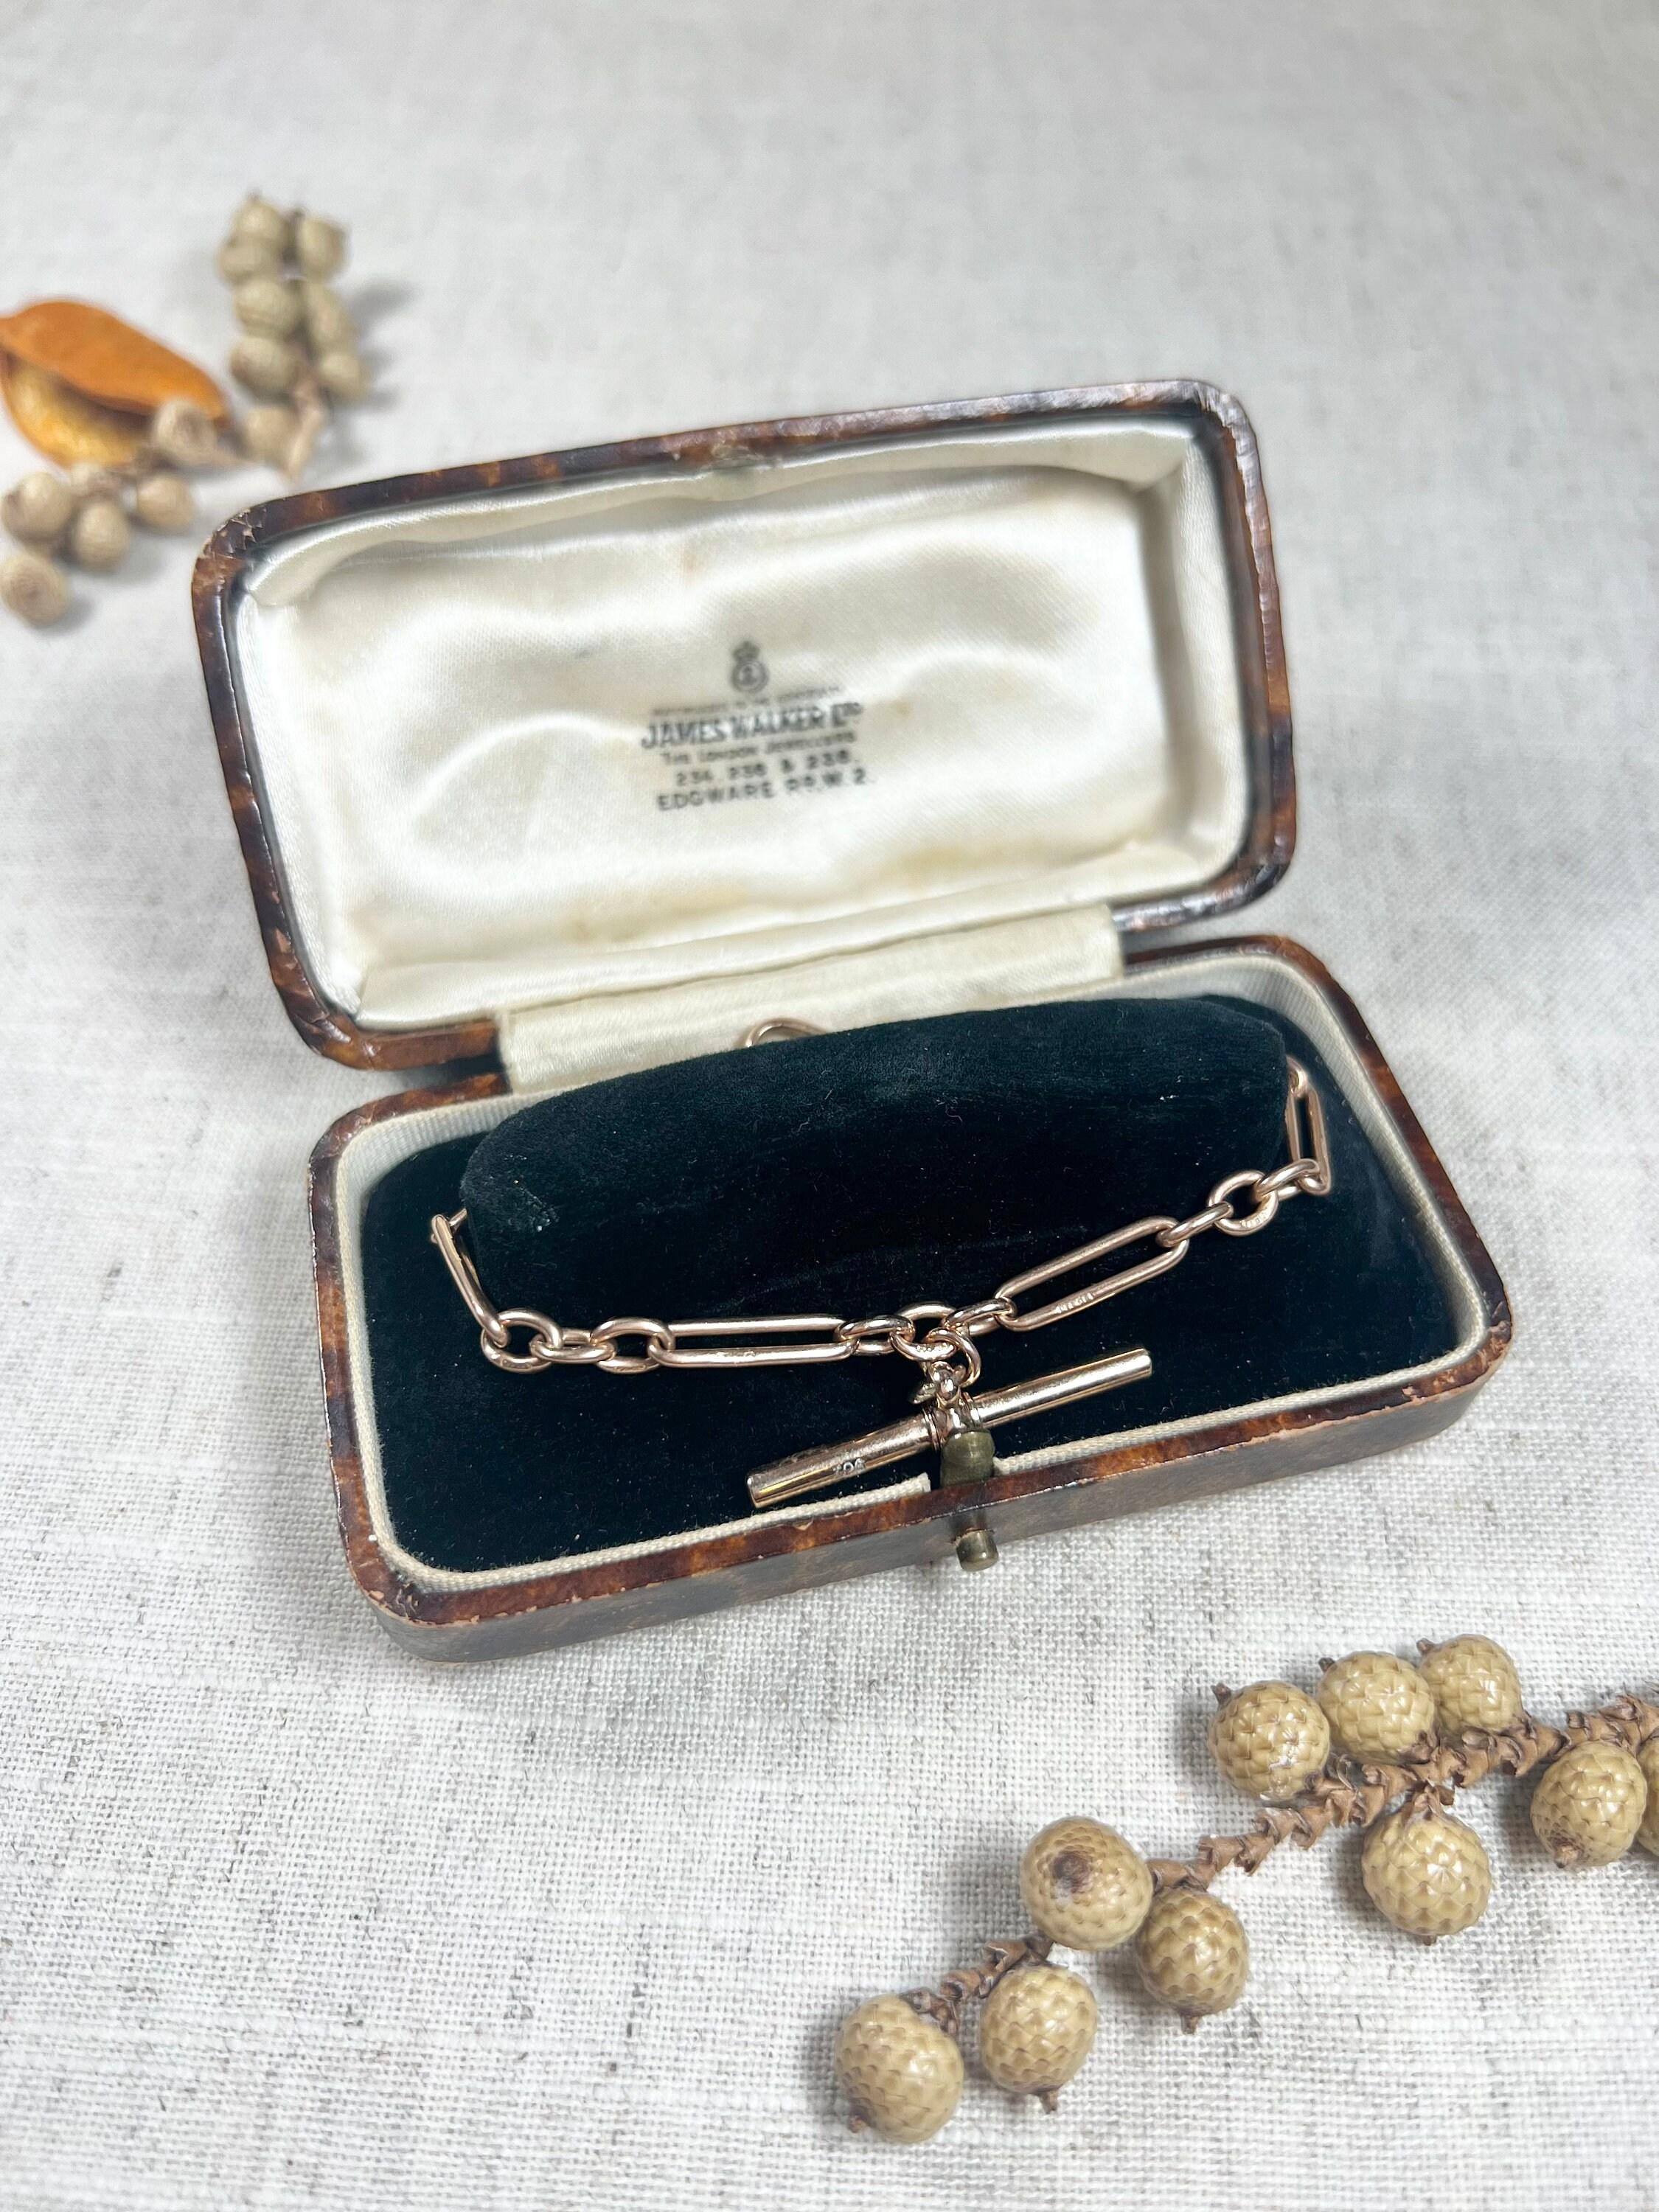 Antique Trombone Bracelet 

9ct Rose Gold Stamped

Circa 1900

This 9ct rose gold Edwardian trombone link bracelet is an exquisite piece of jewellery that is sure to capture your attention. This bracelet is crafted with the finest quality materials